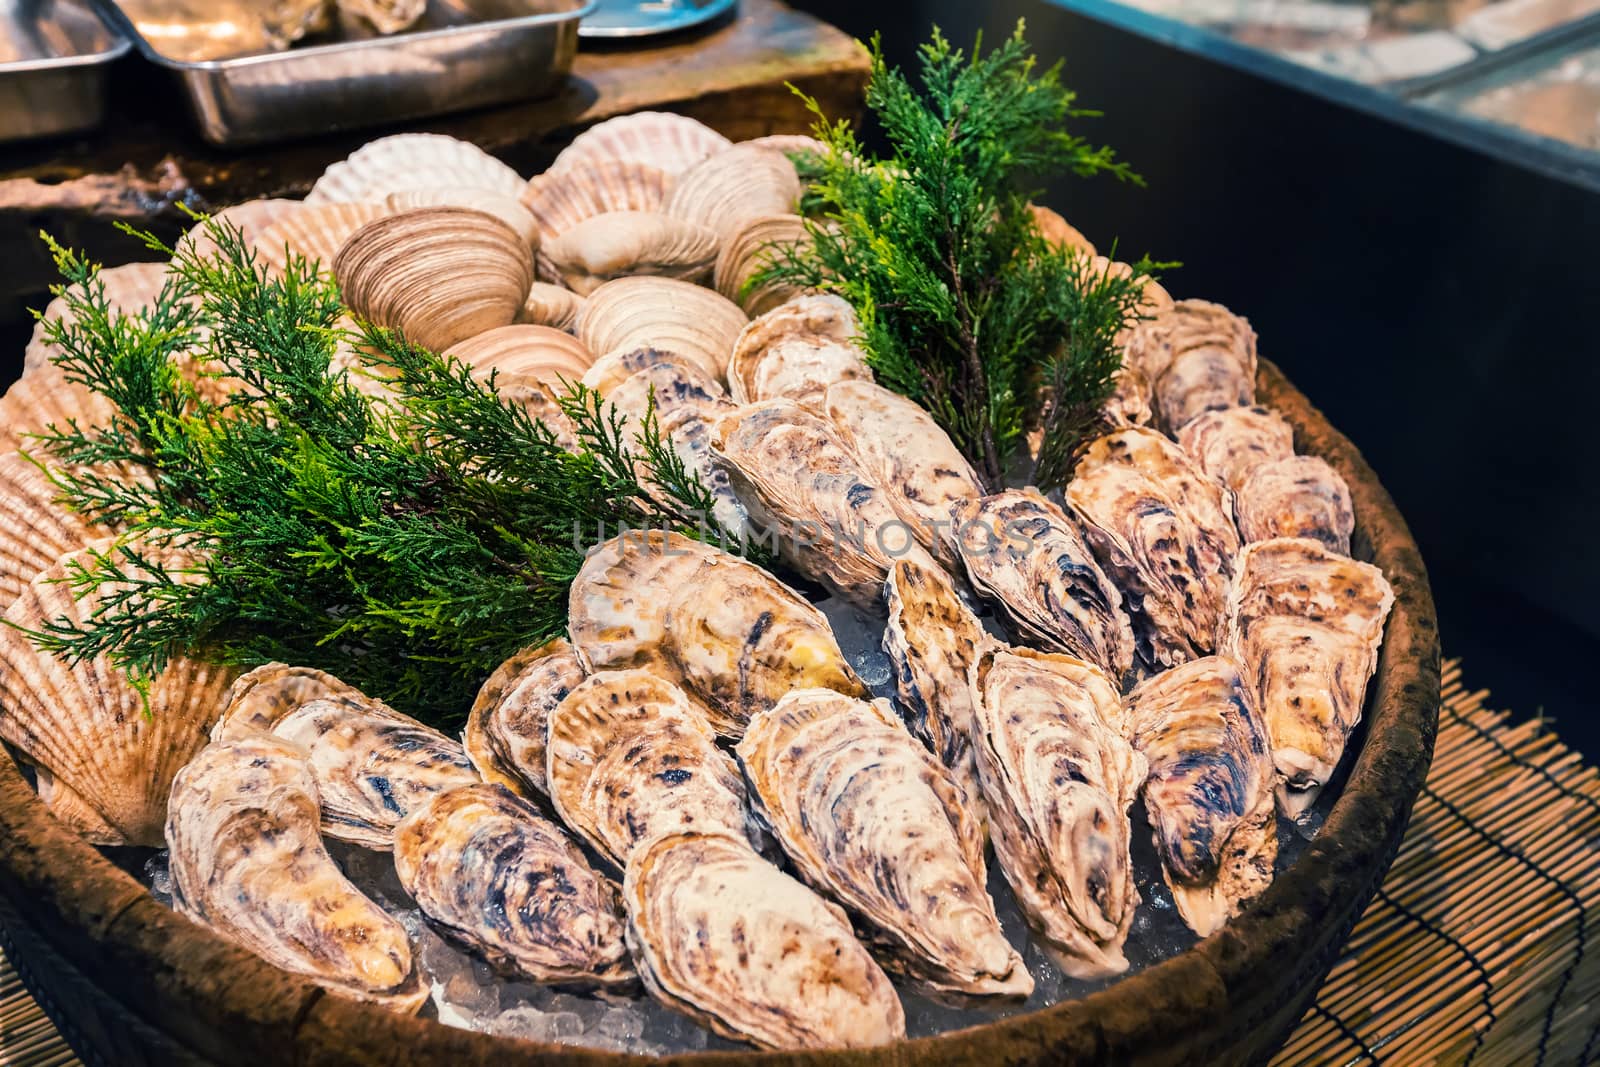 Fresh oyster on ice as street food at Nishiki market in Kyoto, Japan